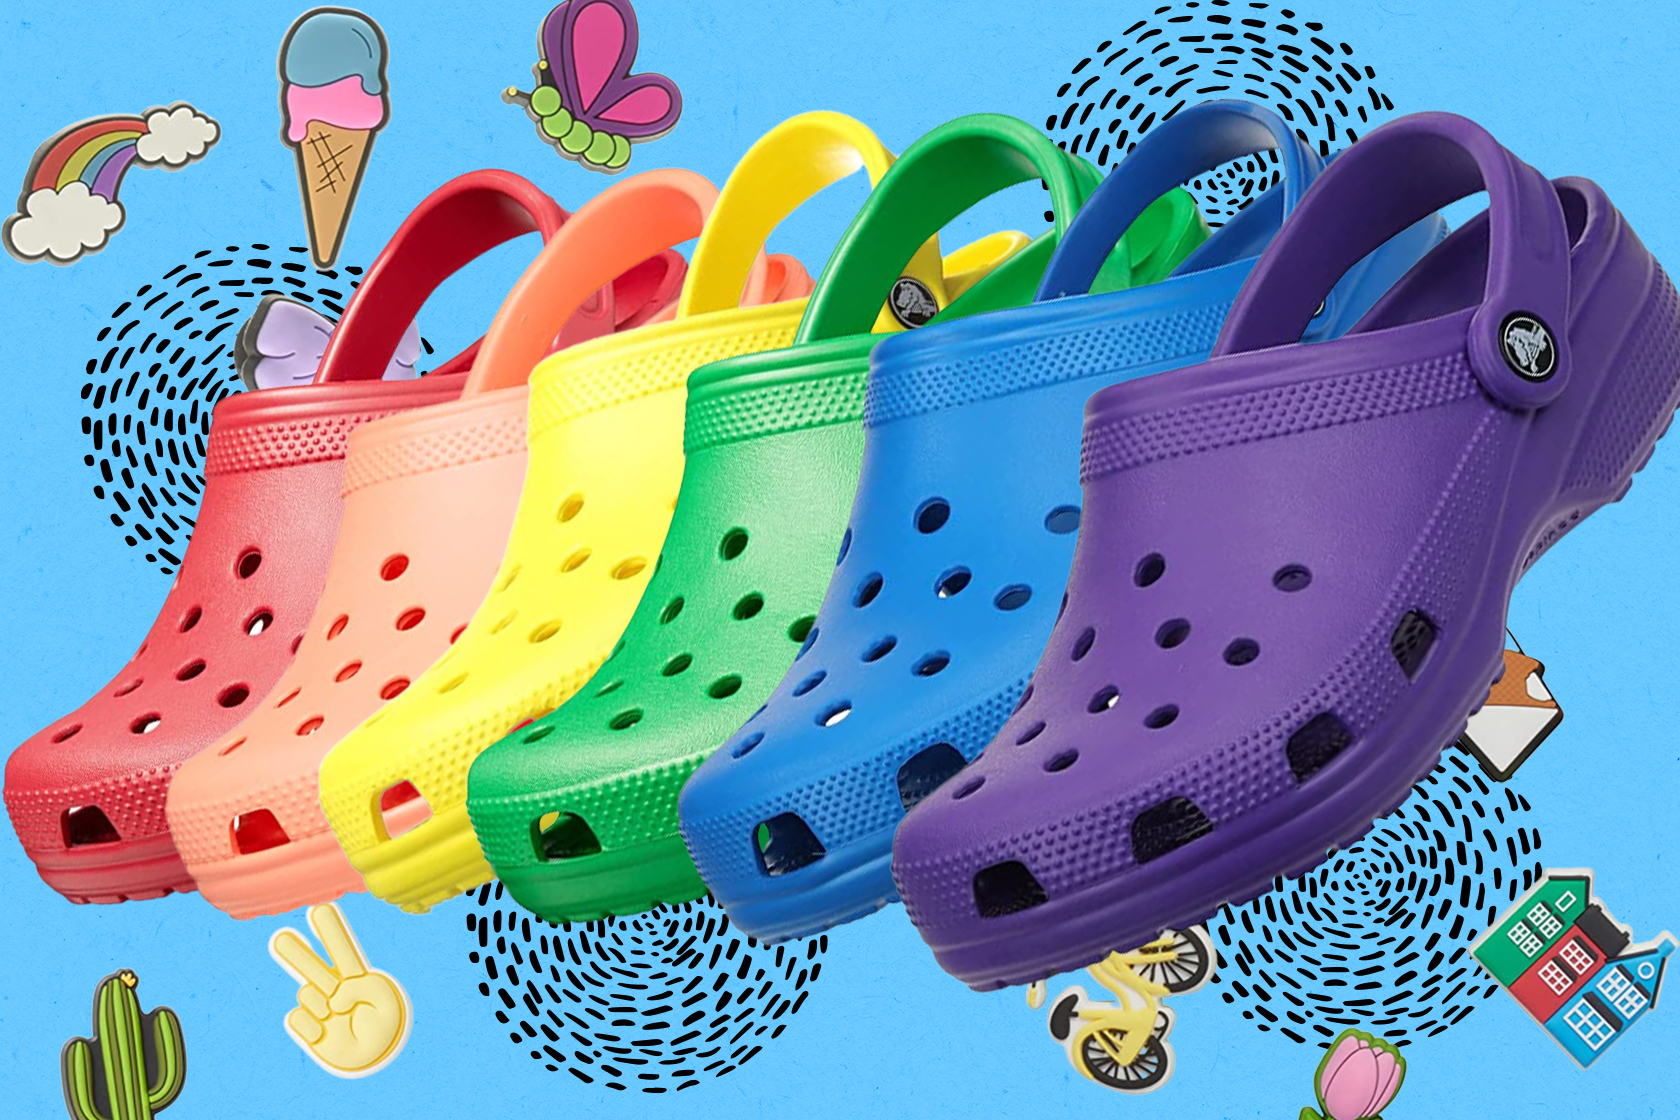 Crocs Are Officially 20 Years Here's Why Now's The Time To Buy A Pair ...